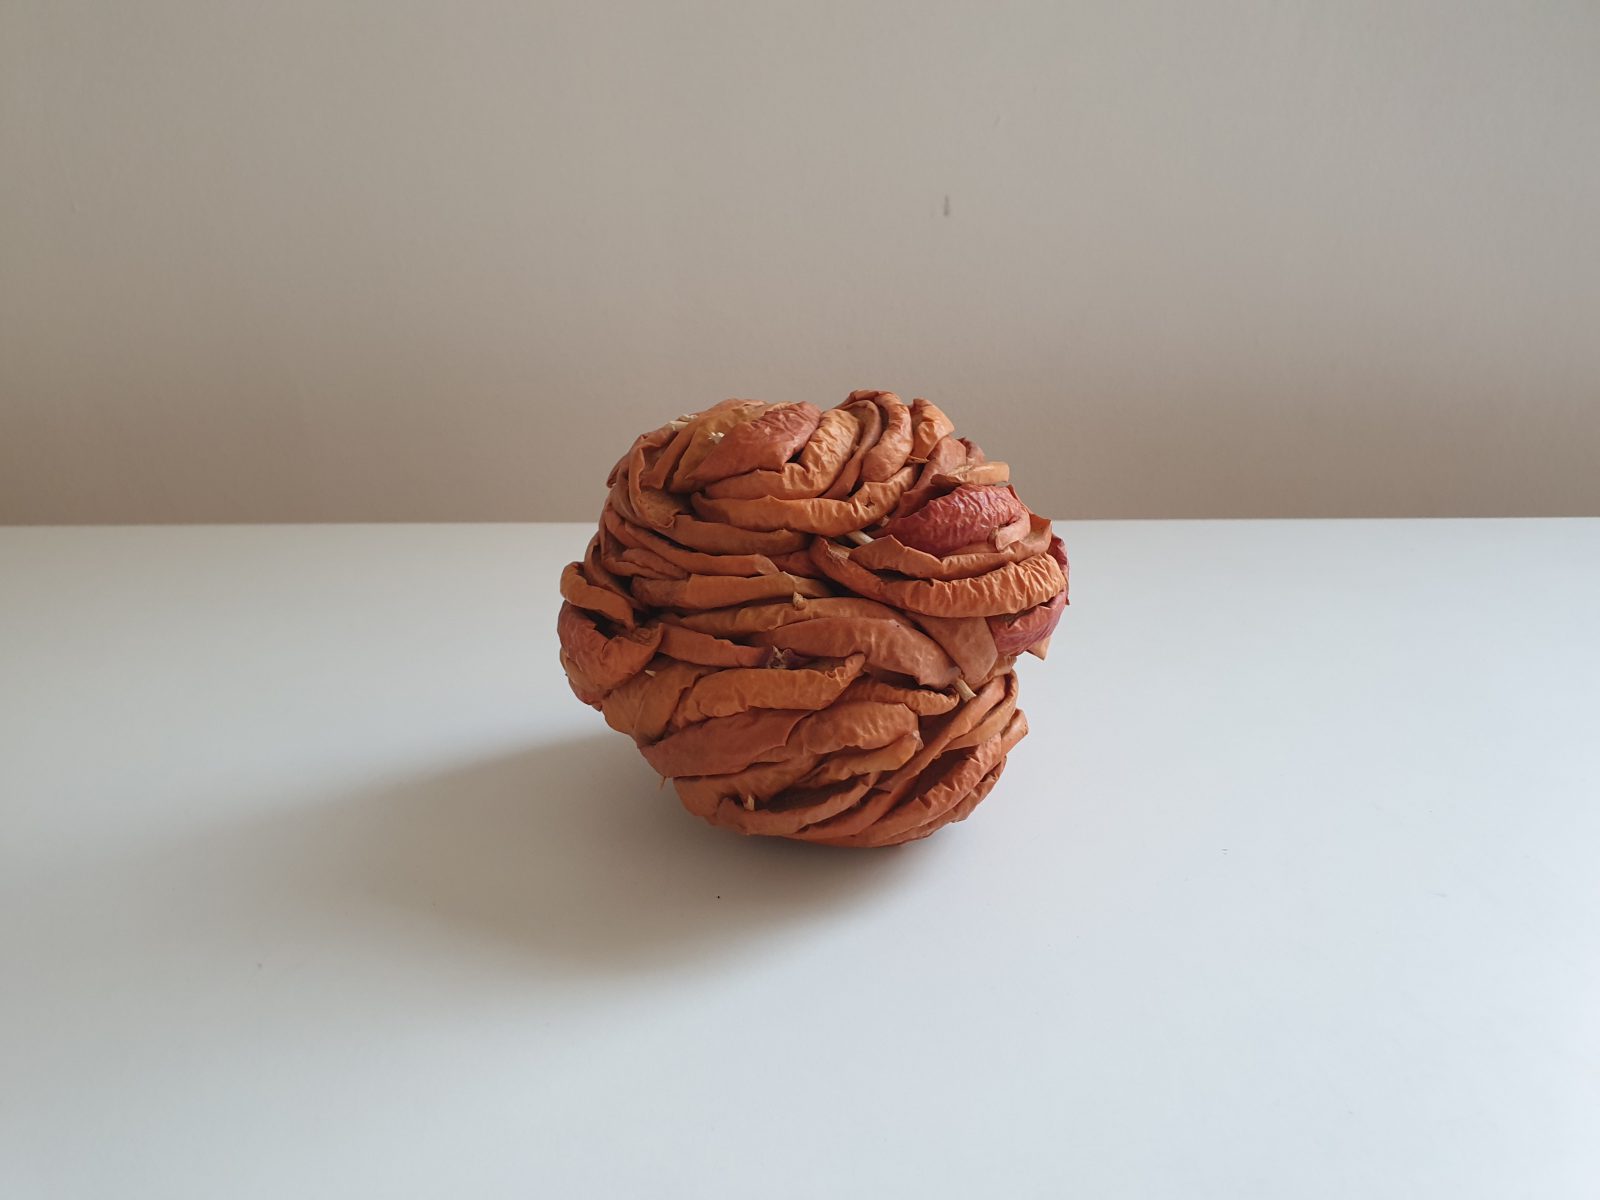 An apple made from dried apples, lend to the exhibition by artist Martin Piacek, to accompany a short film from his countryside initiative, The Rajka orchard.